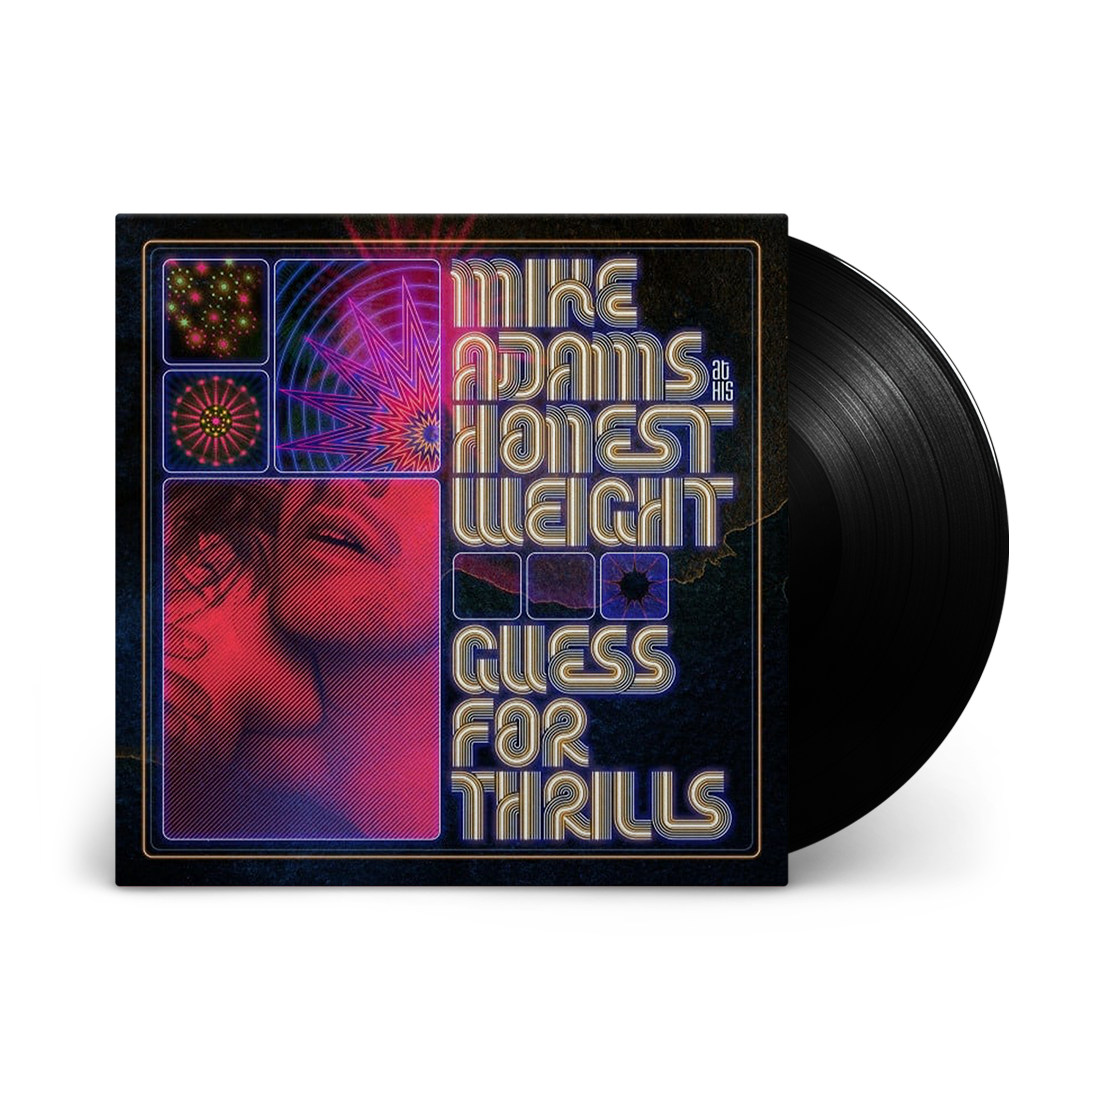 Mike Adams At His Honest Weight - Guess For Thrills: Vinyl LP